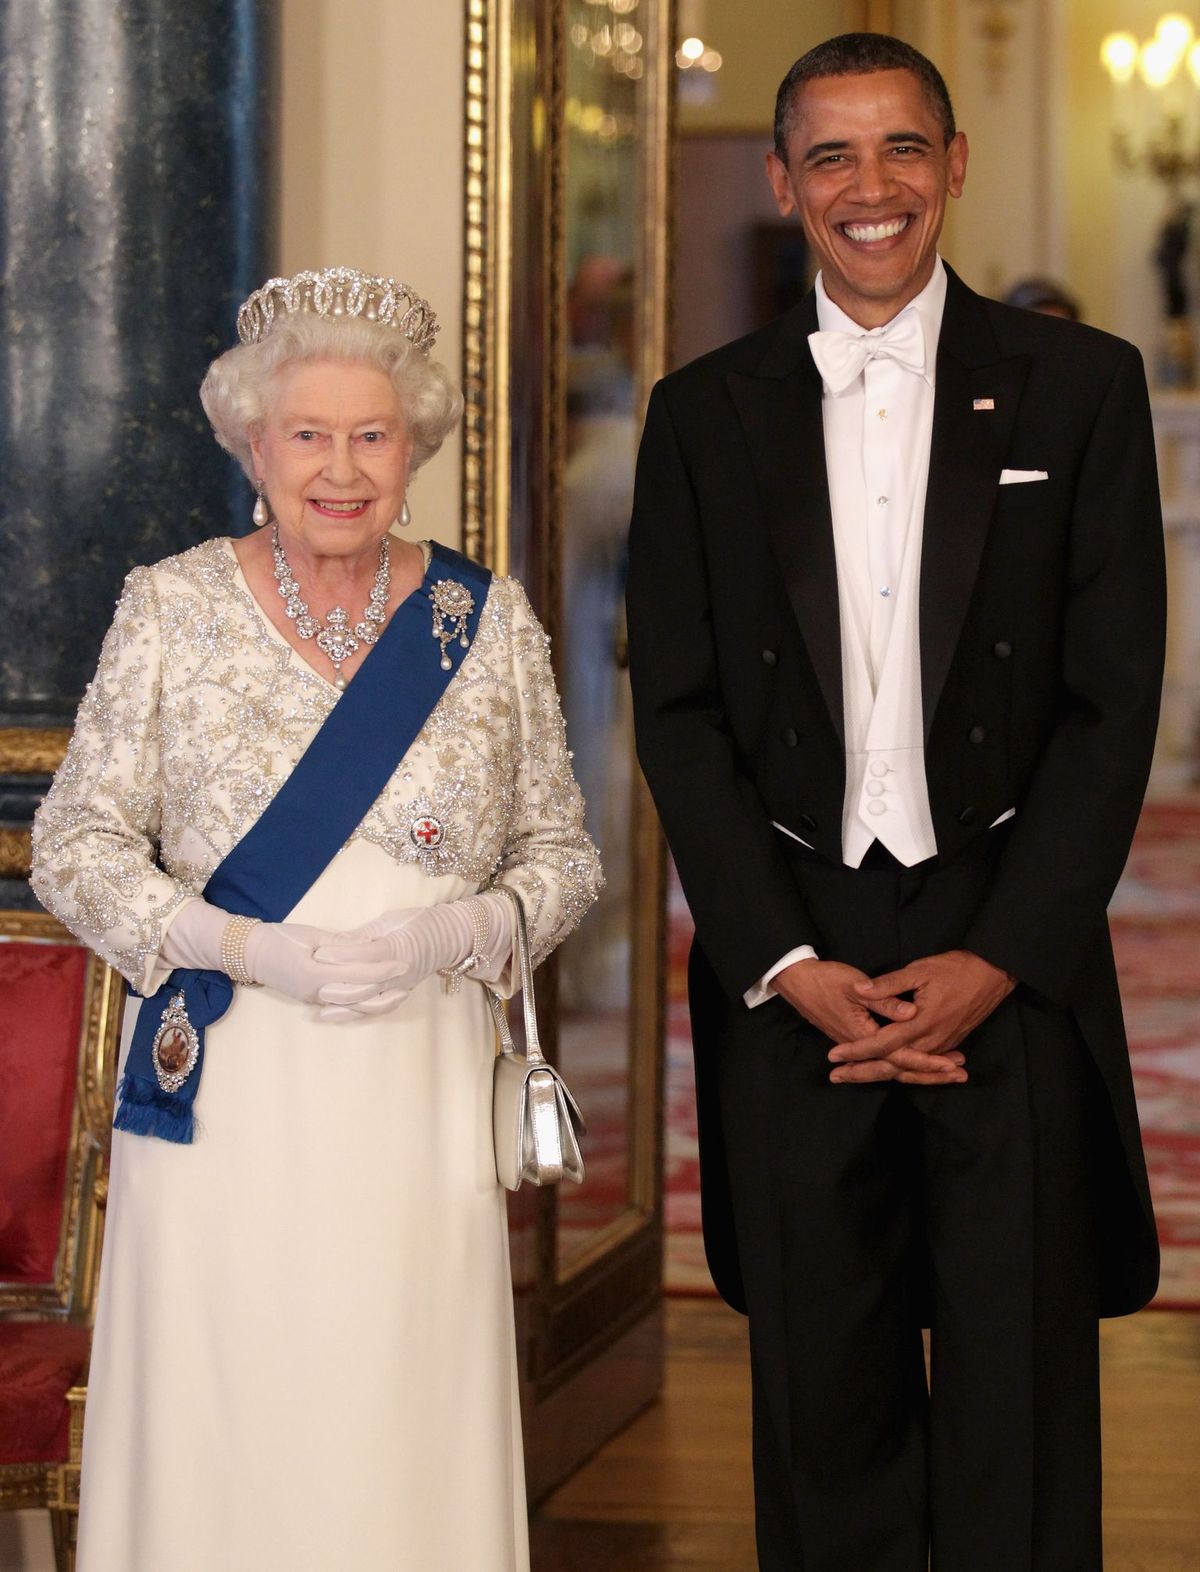 Queen Elizabeth II and Former President Barack Obama pose in the Music Room of Buckingham Palace on May 24, 2011 in London, England. | Photo: Getty Images.